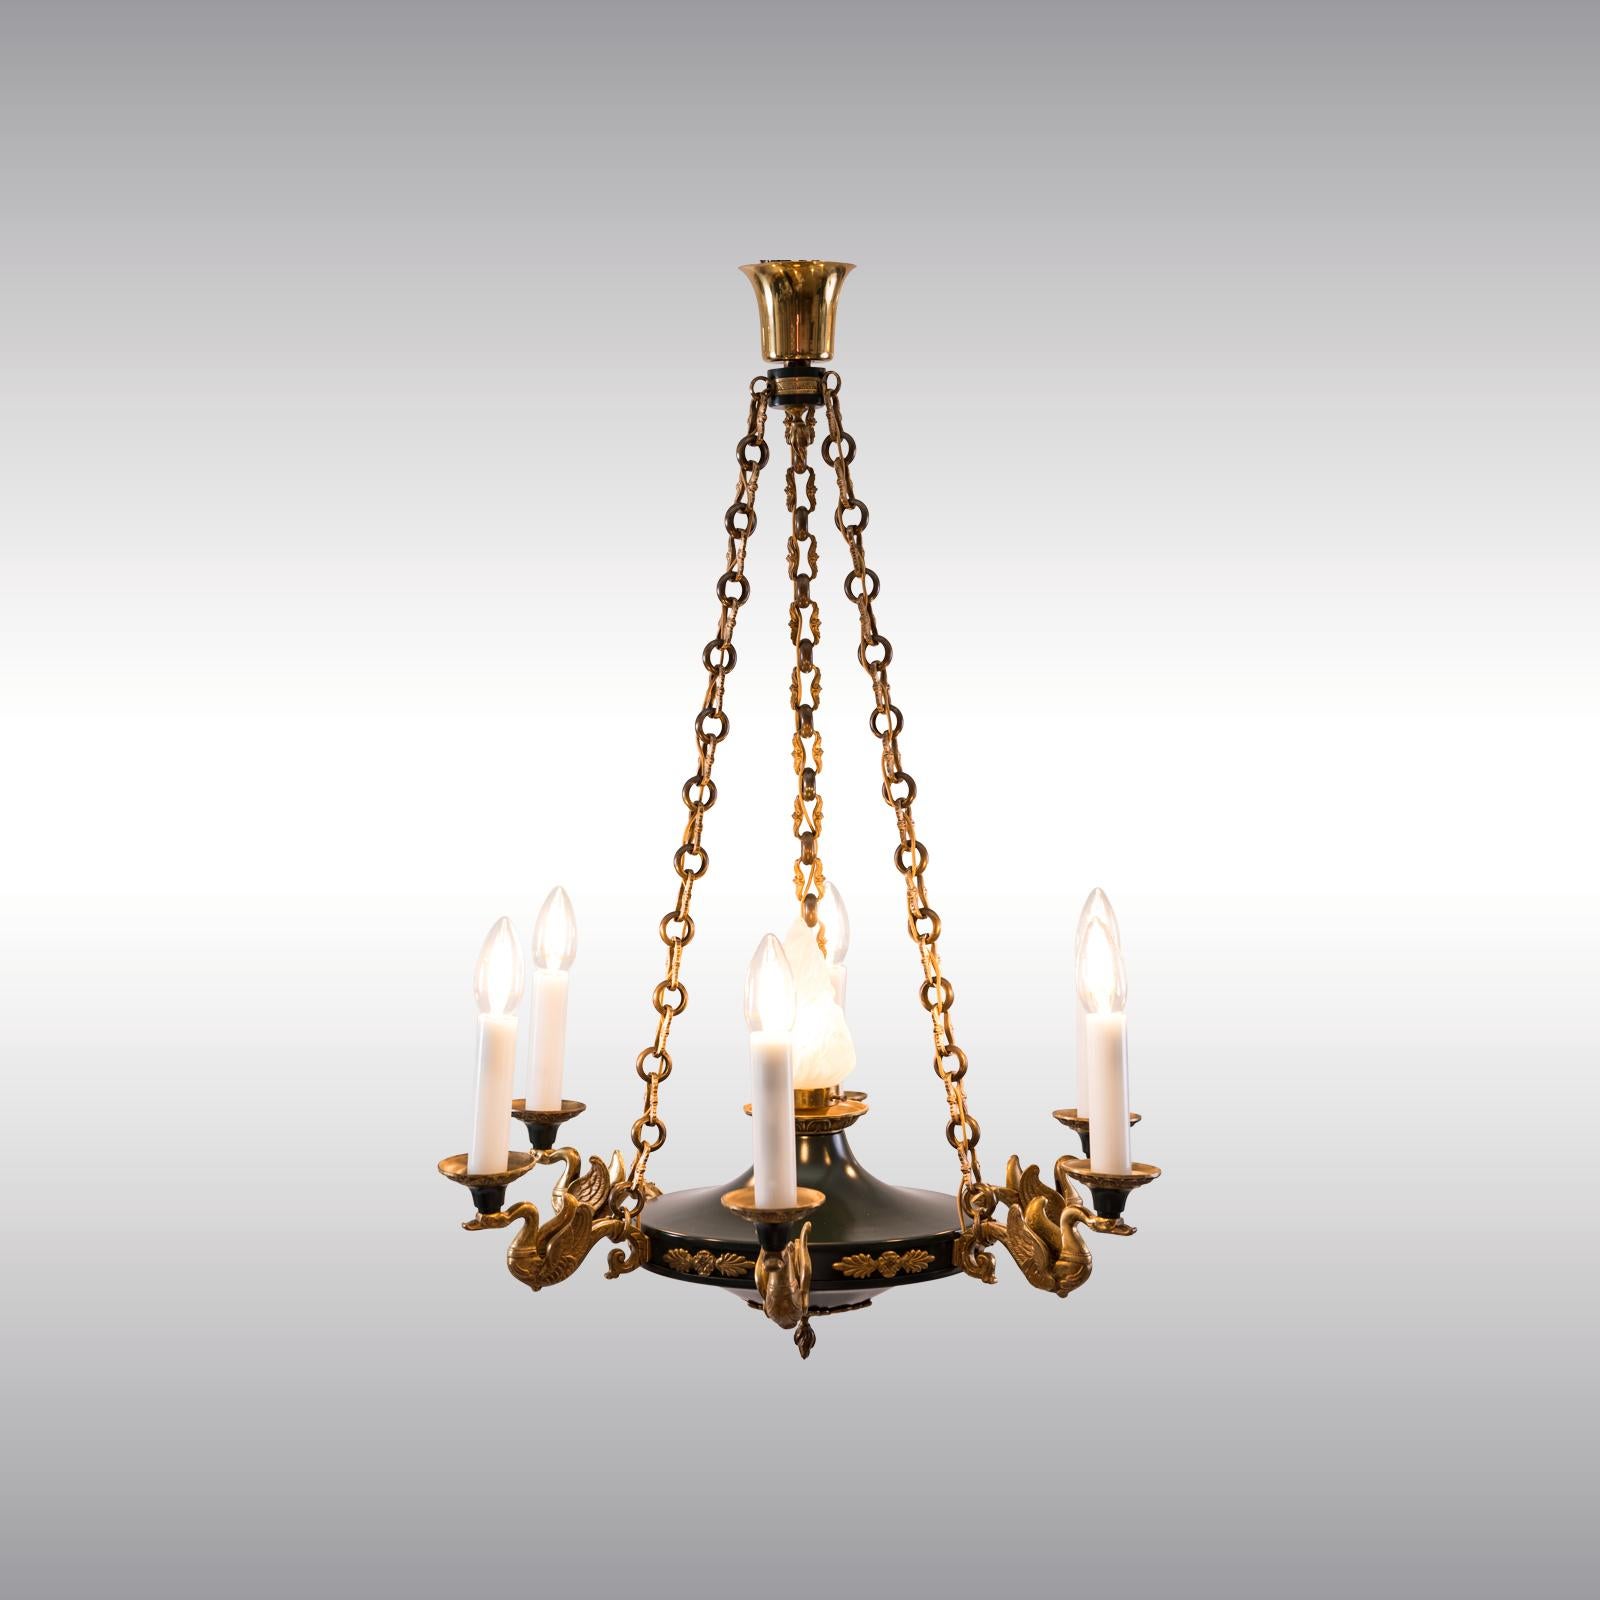 Very decorative chandelier in the style of Empire from the historistic Art Deco Period circa 1920. Stylized swans in gilded and punched casted brass

Suitable for the US.